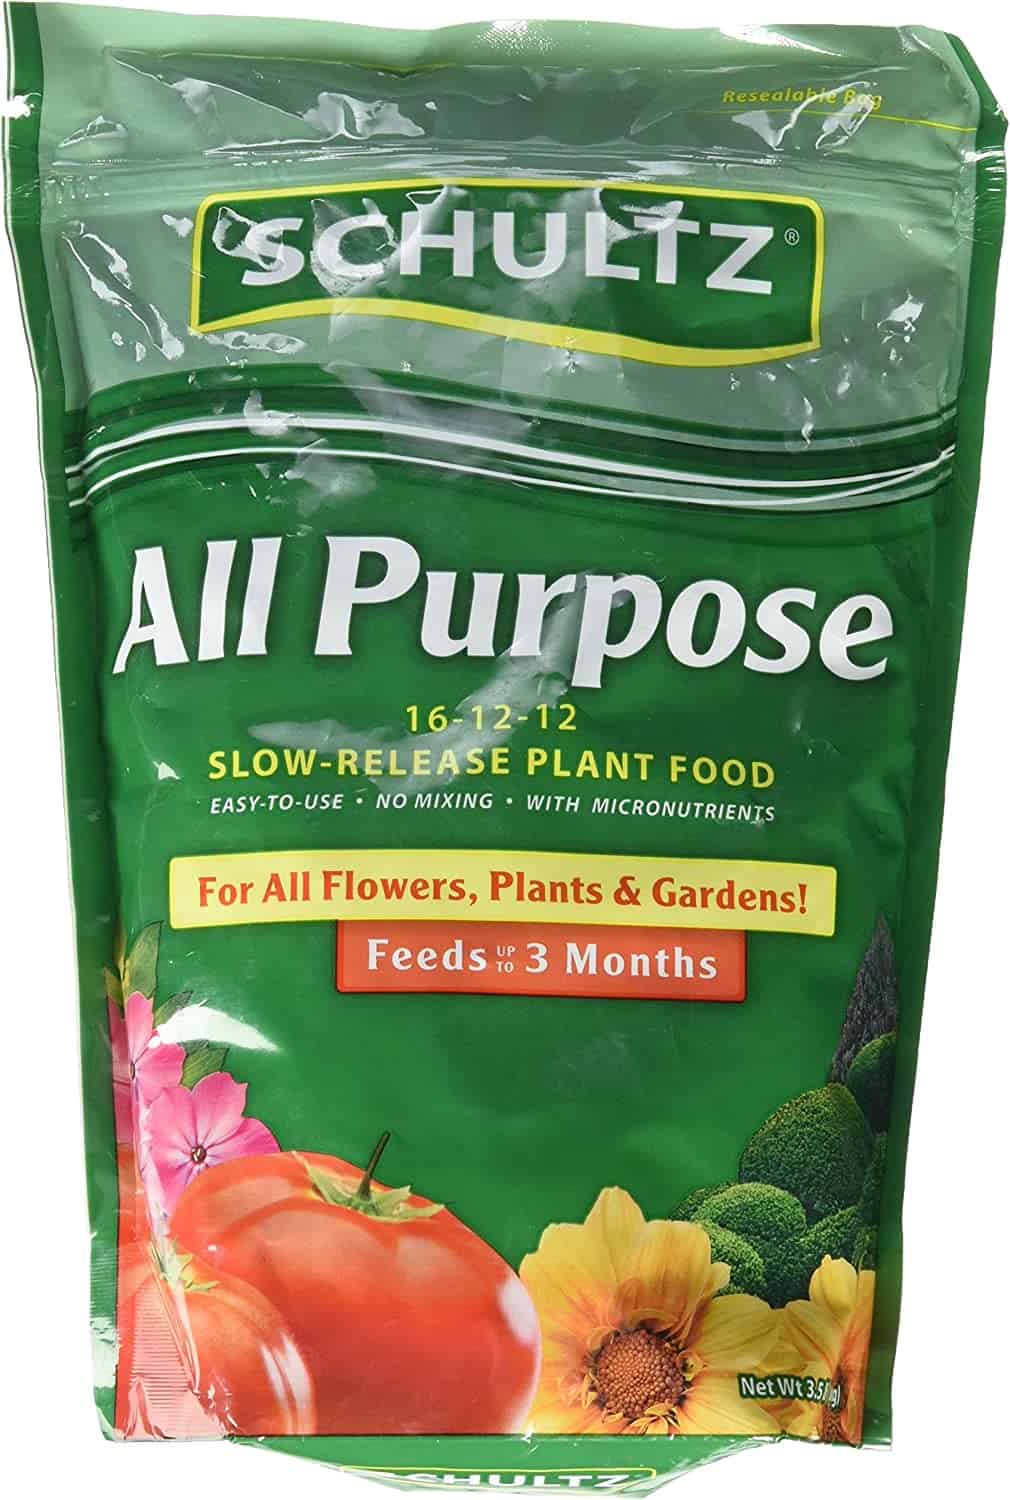 Schultz 018061 Spf48640 All Purpose Slow-Release Plant Food, 3.5 Lbs, 56 Ounce